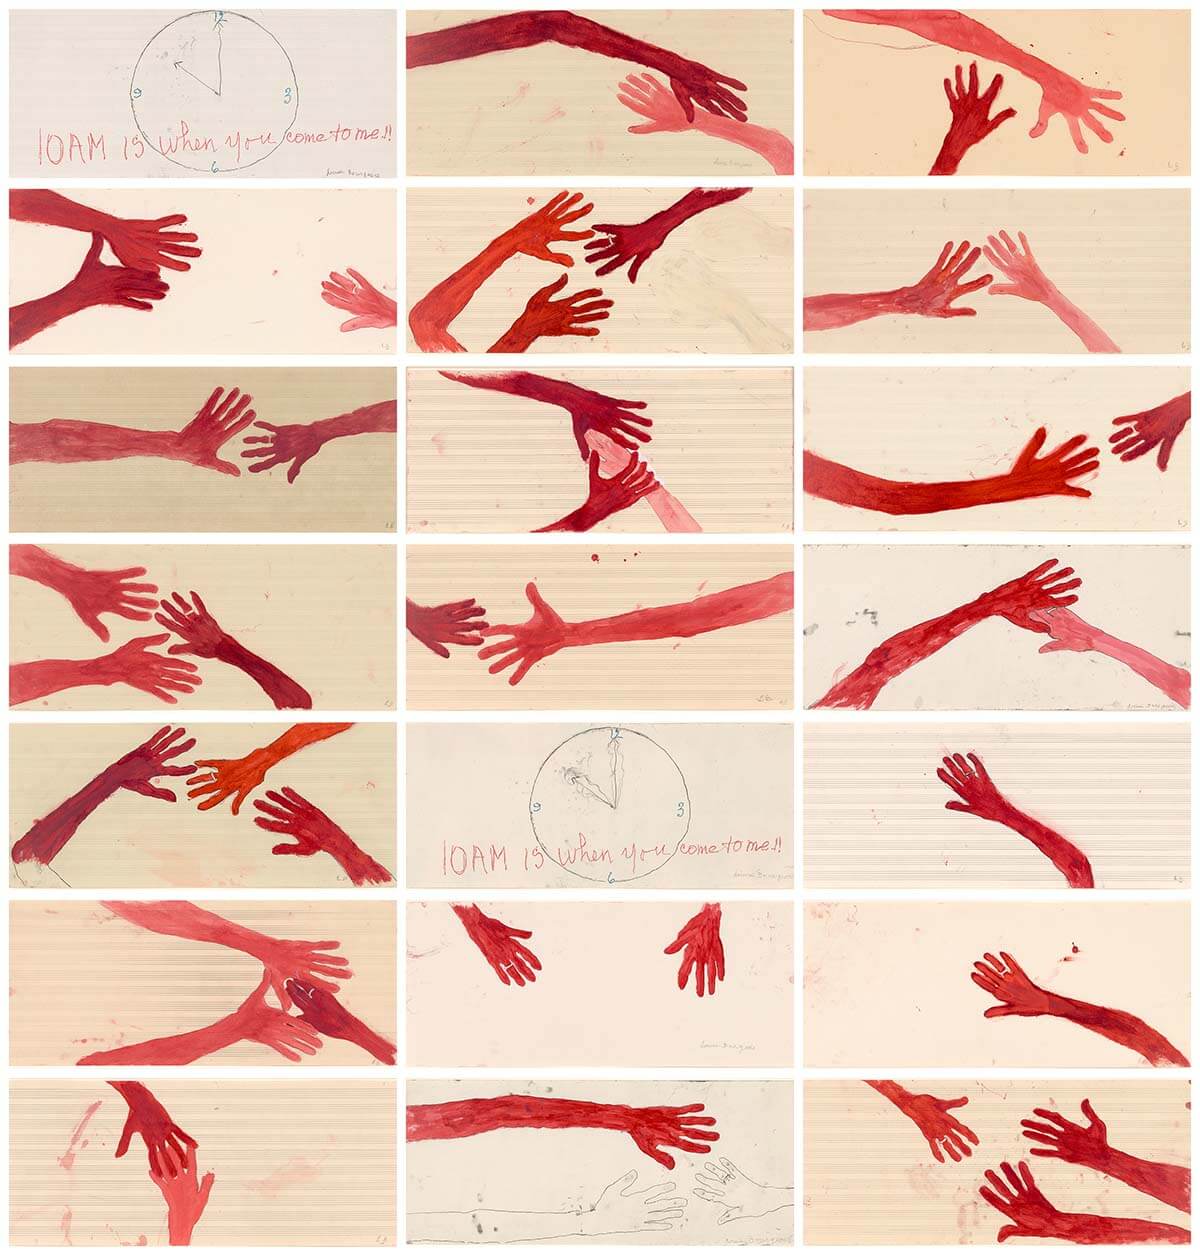 Painting of red hands reaching with the words ‘10am is when you come to me’ by Louise Bourgeois